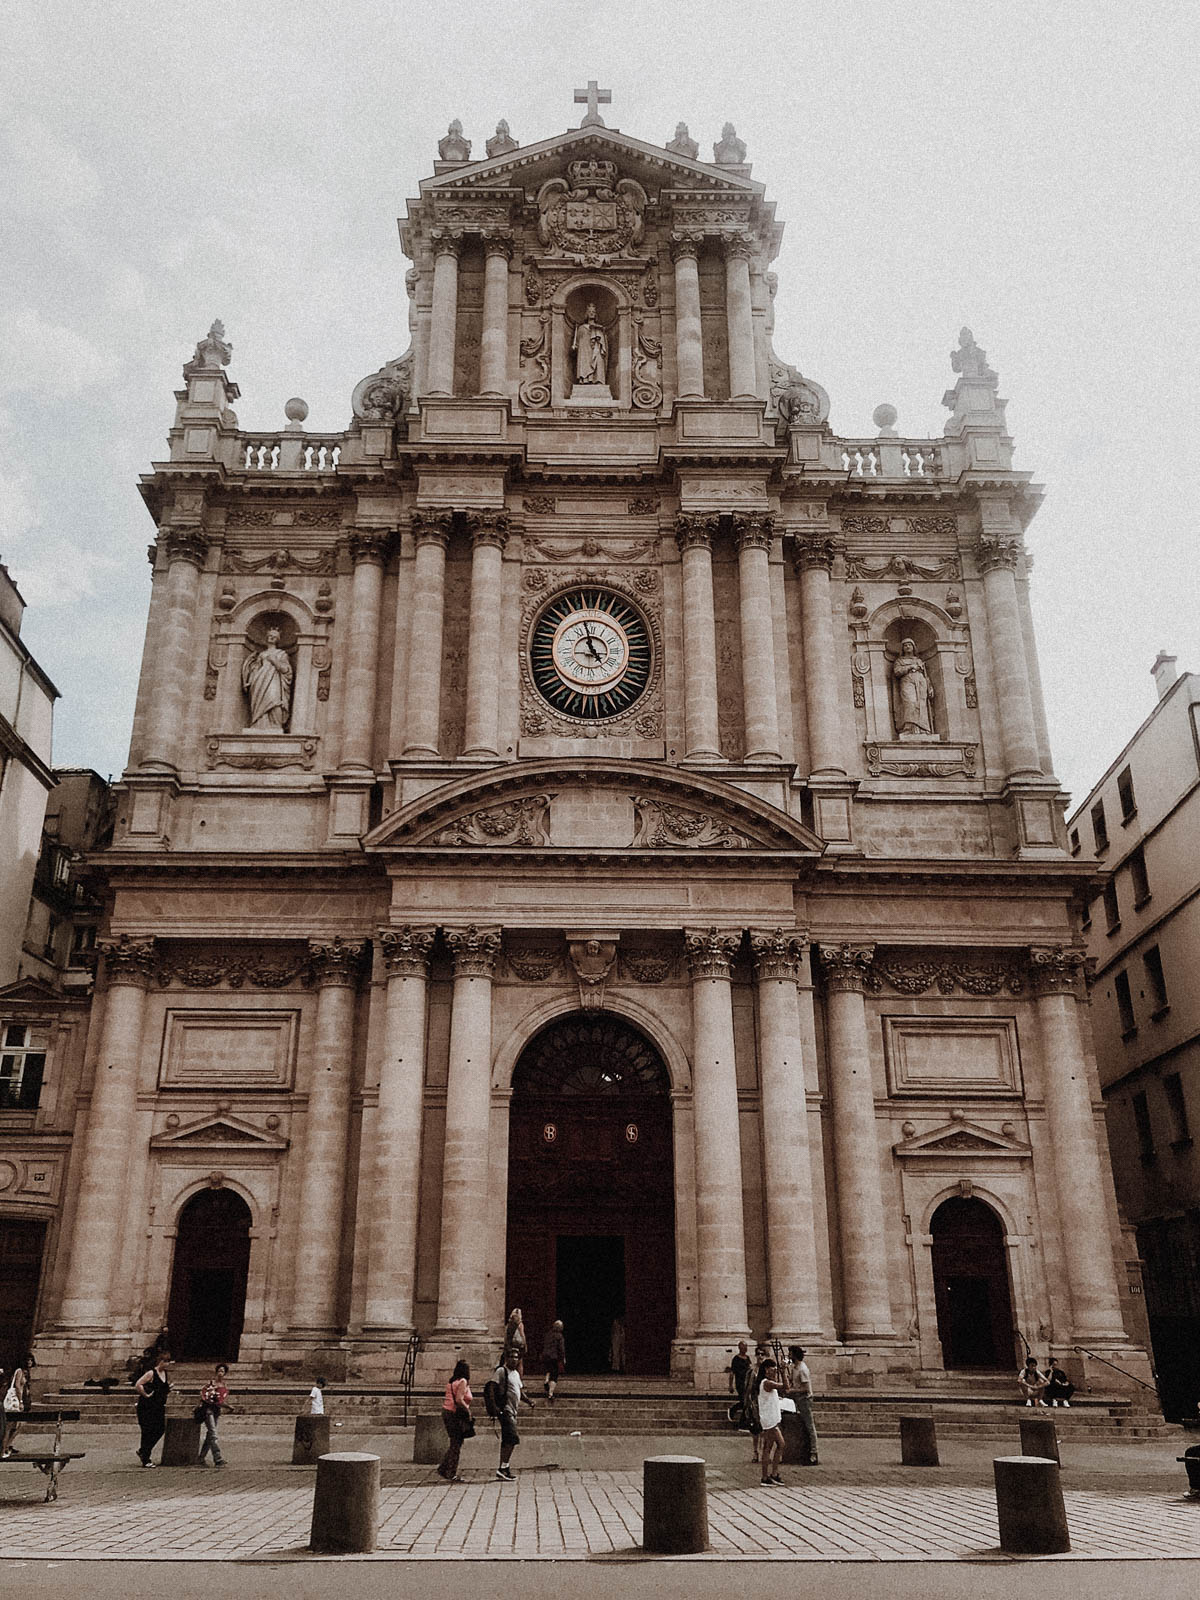 Paris France Travel Guide - French Cathedral, European Architecture and Buildings / RG Daily Blog